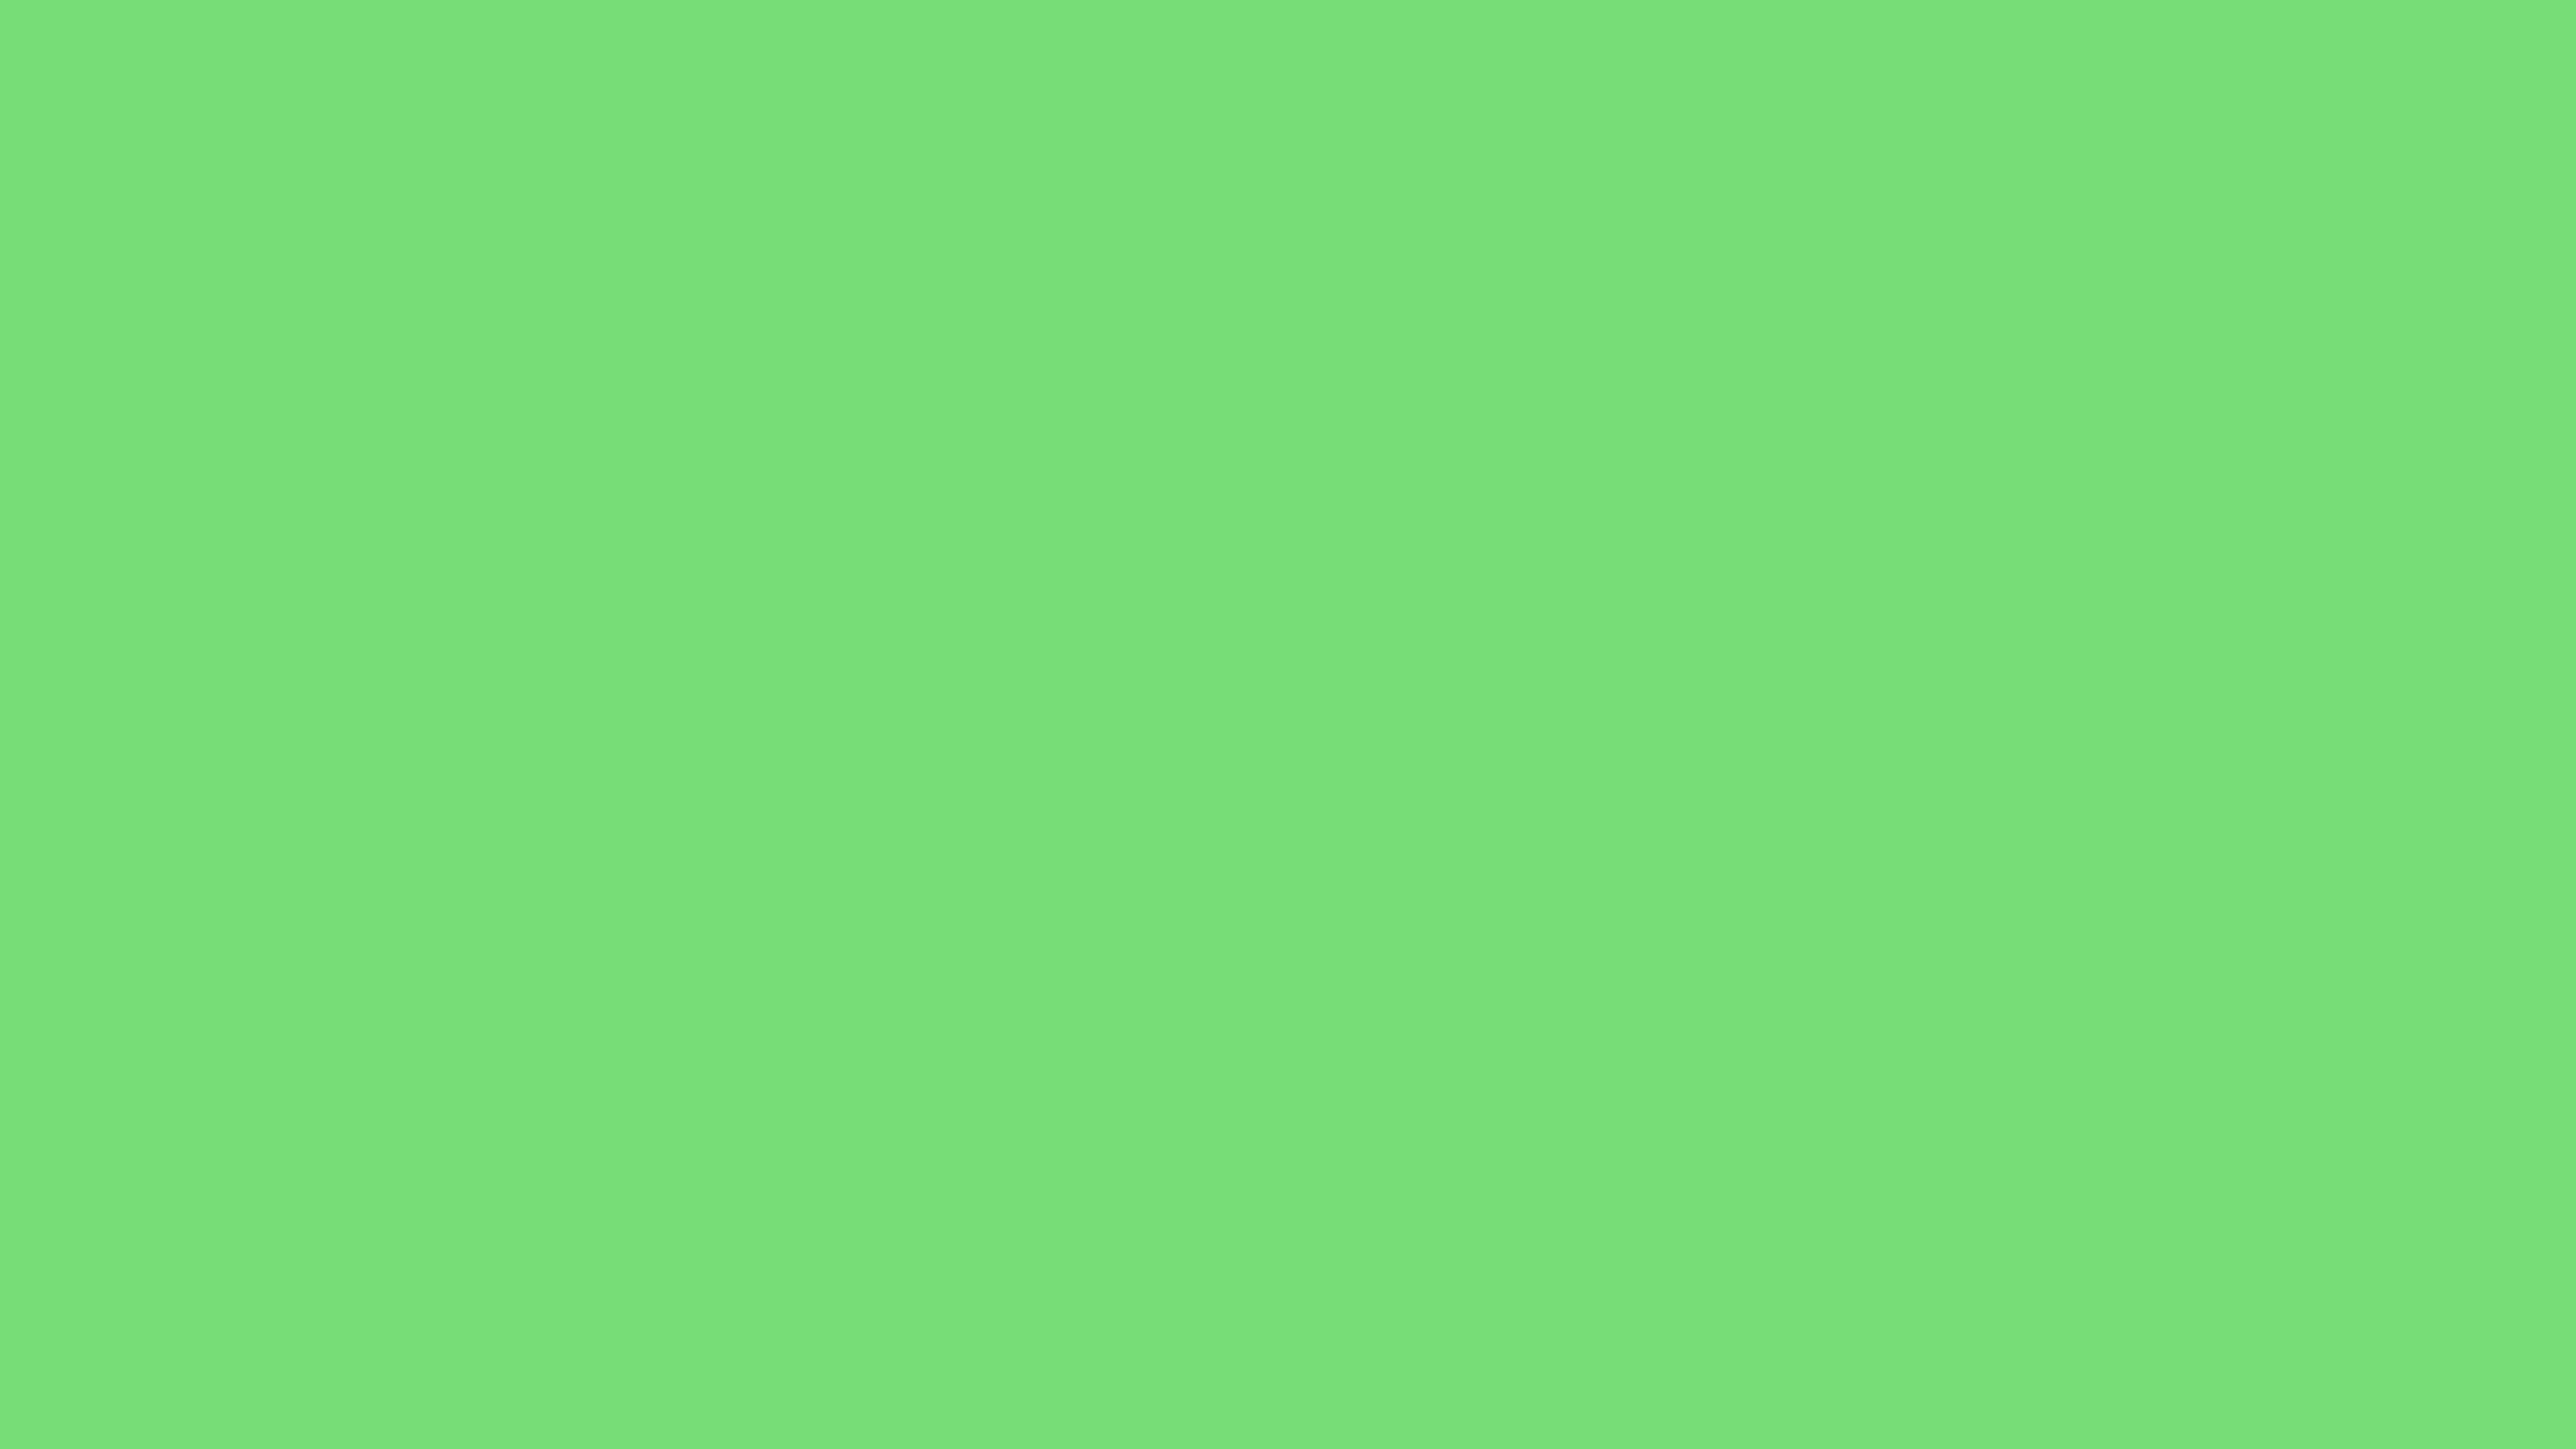 7680x4320 Pastel Green Solid Color Background